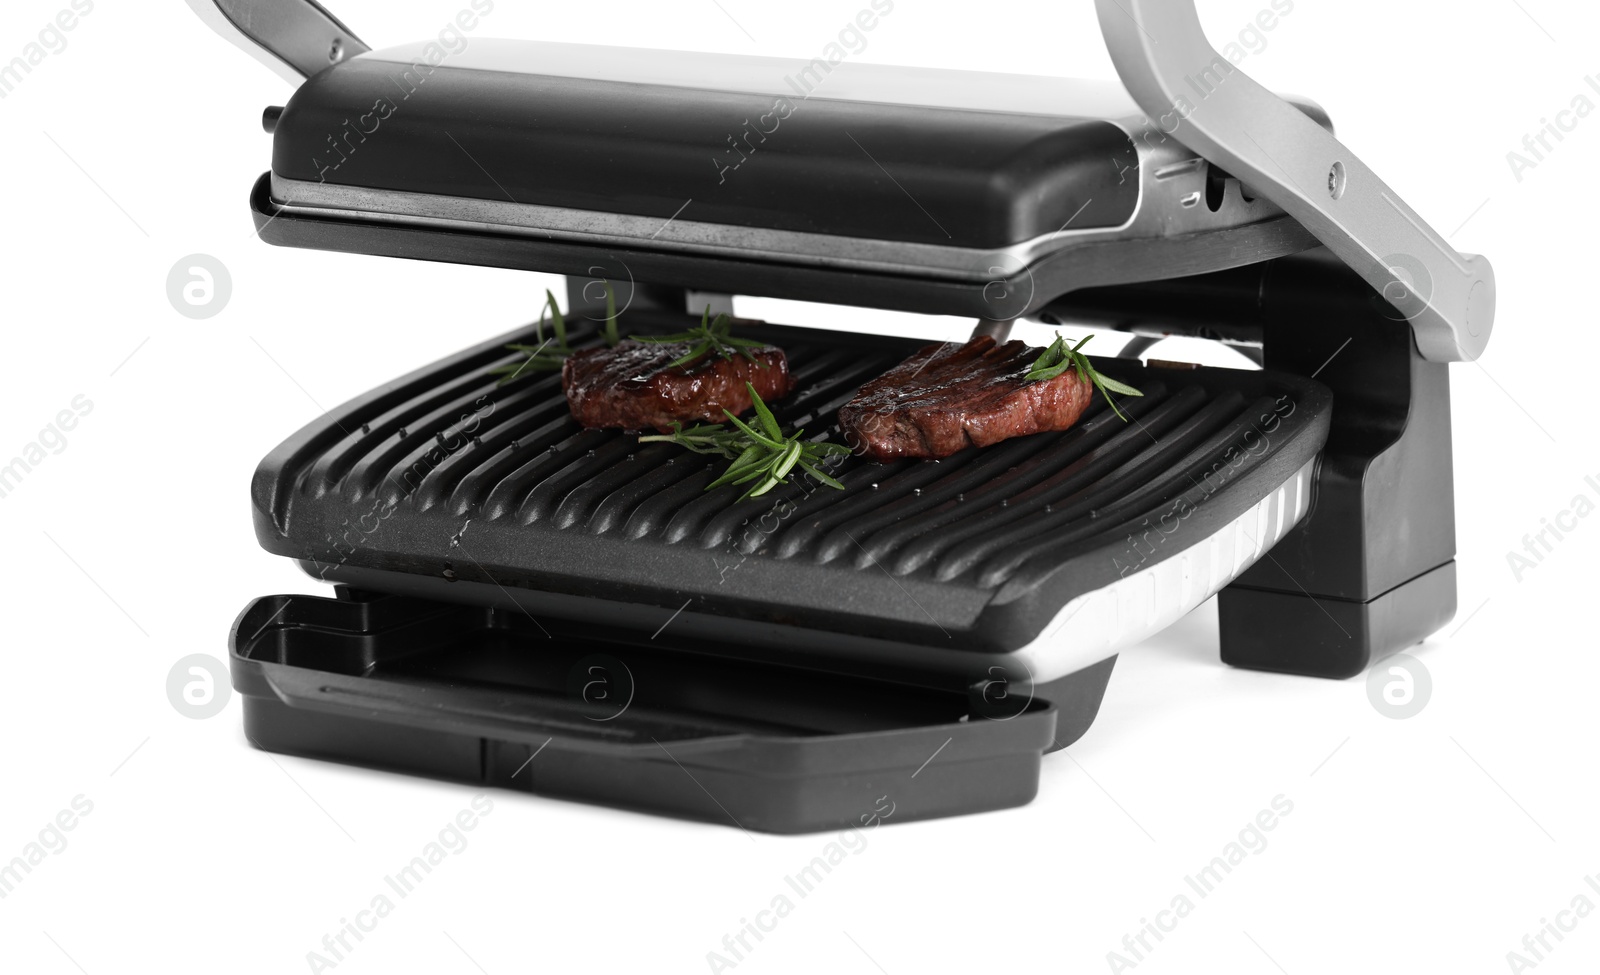 Photo of Electric grill with tasty meat steaks and rosemary isolated on white